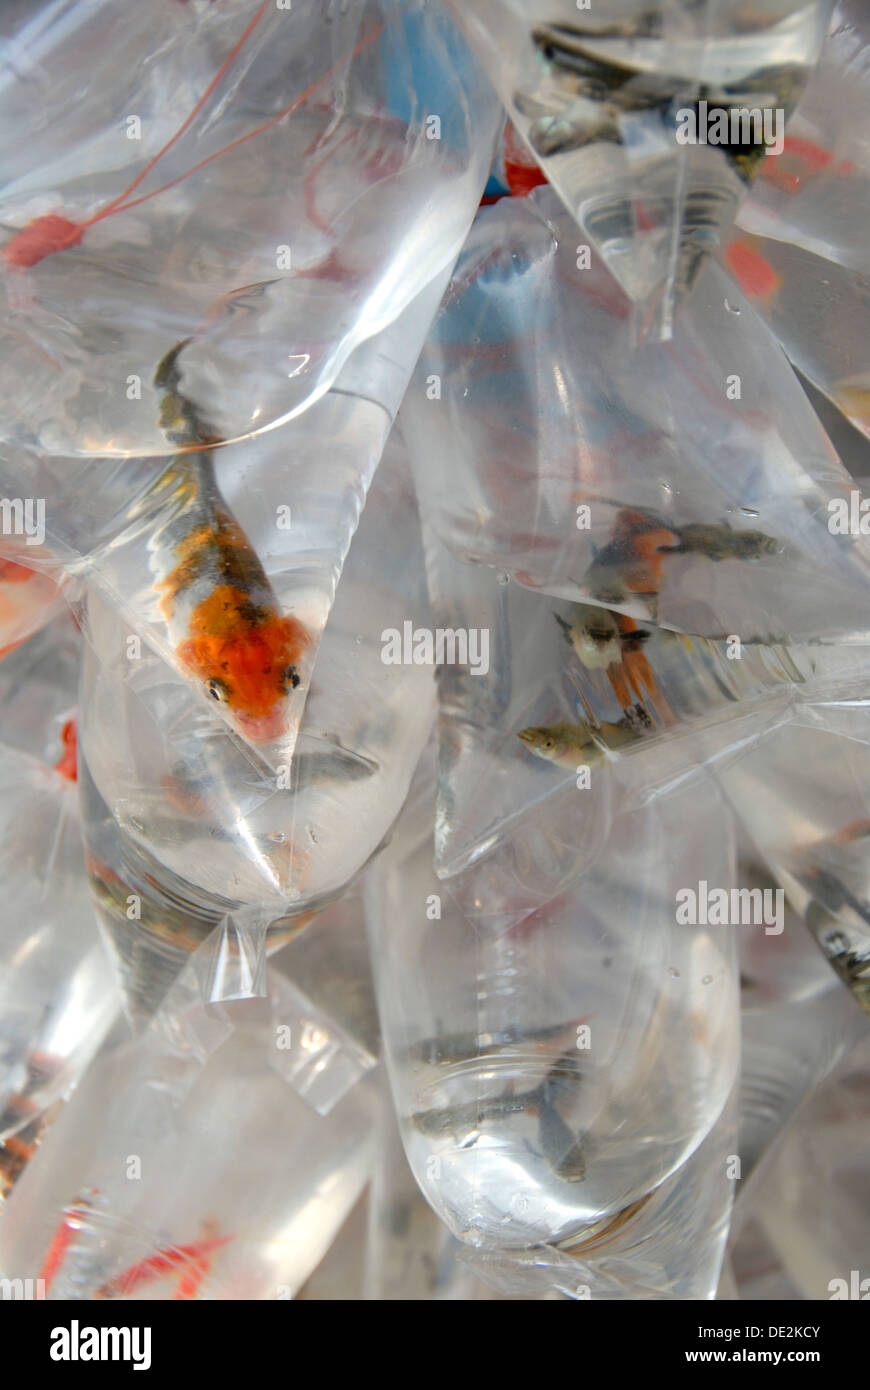 Colorful fish trapped in small plastic bags with water, at Bangkok, Thailand, Southeast Asia, Asia Stock Photo